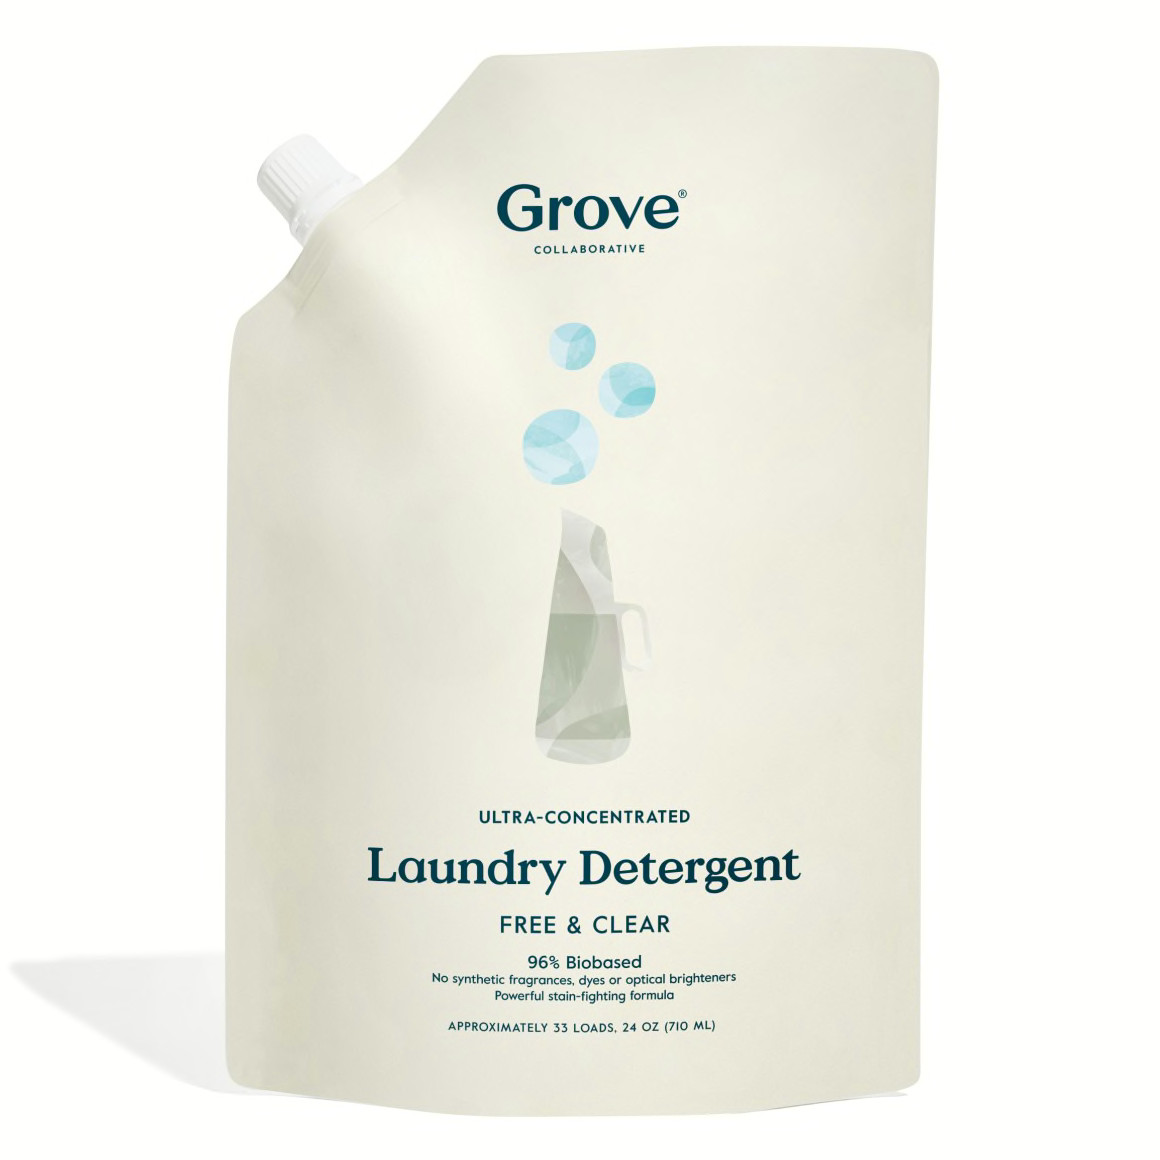 Grove Co. Ultra-Concentrated Liquid Laundry Detergent